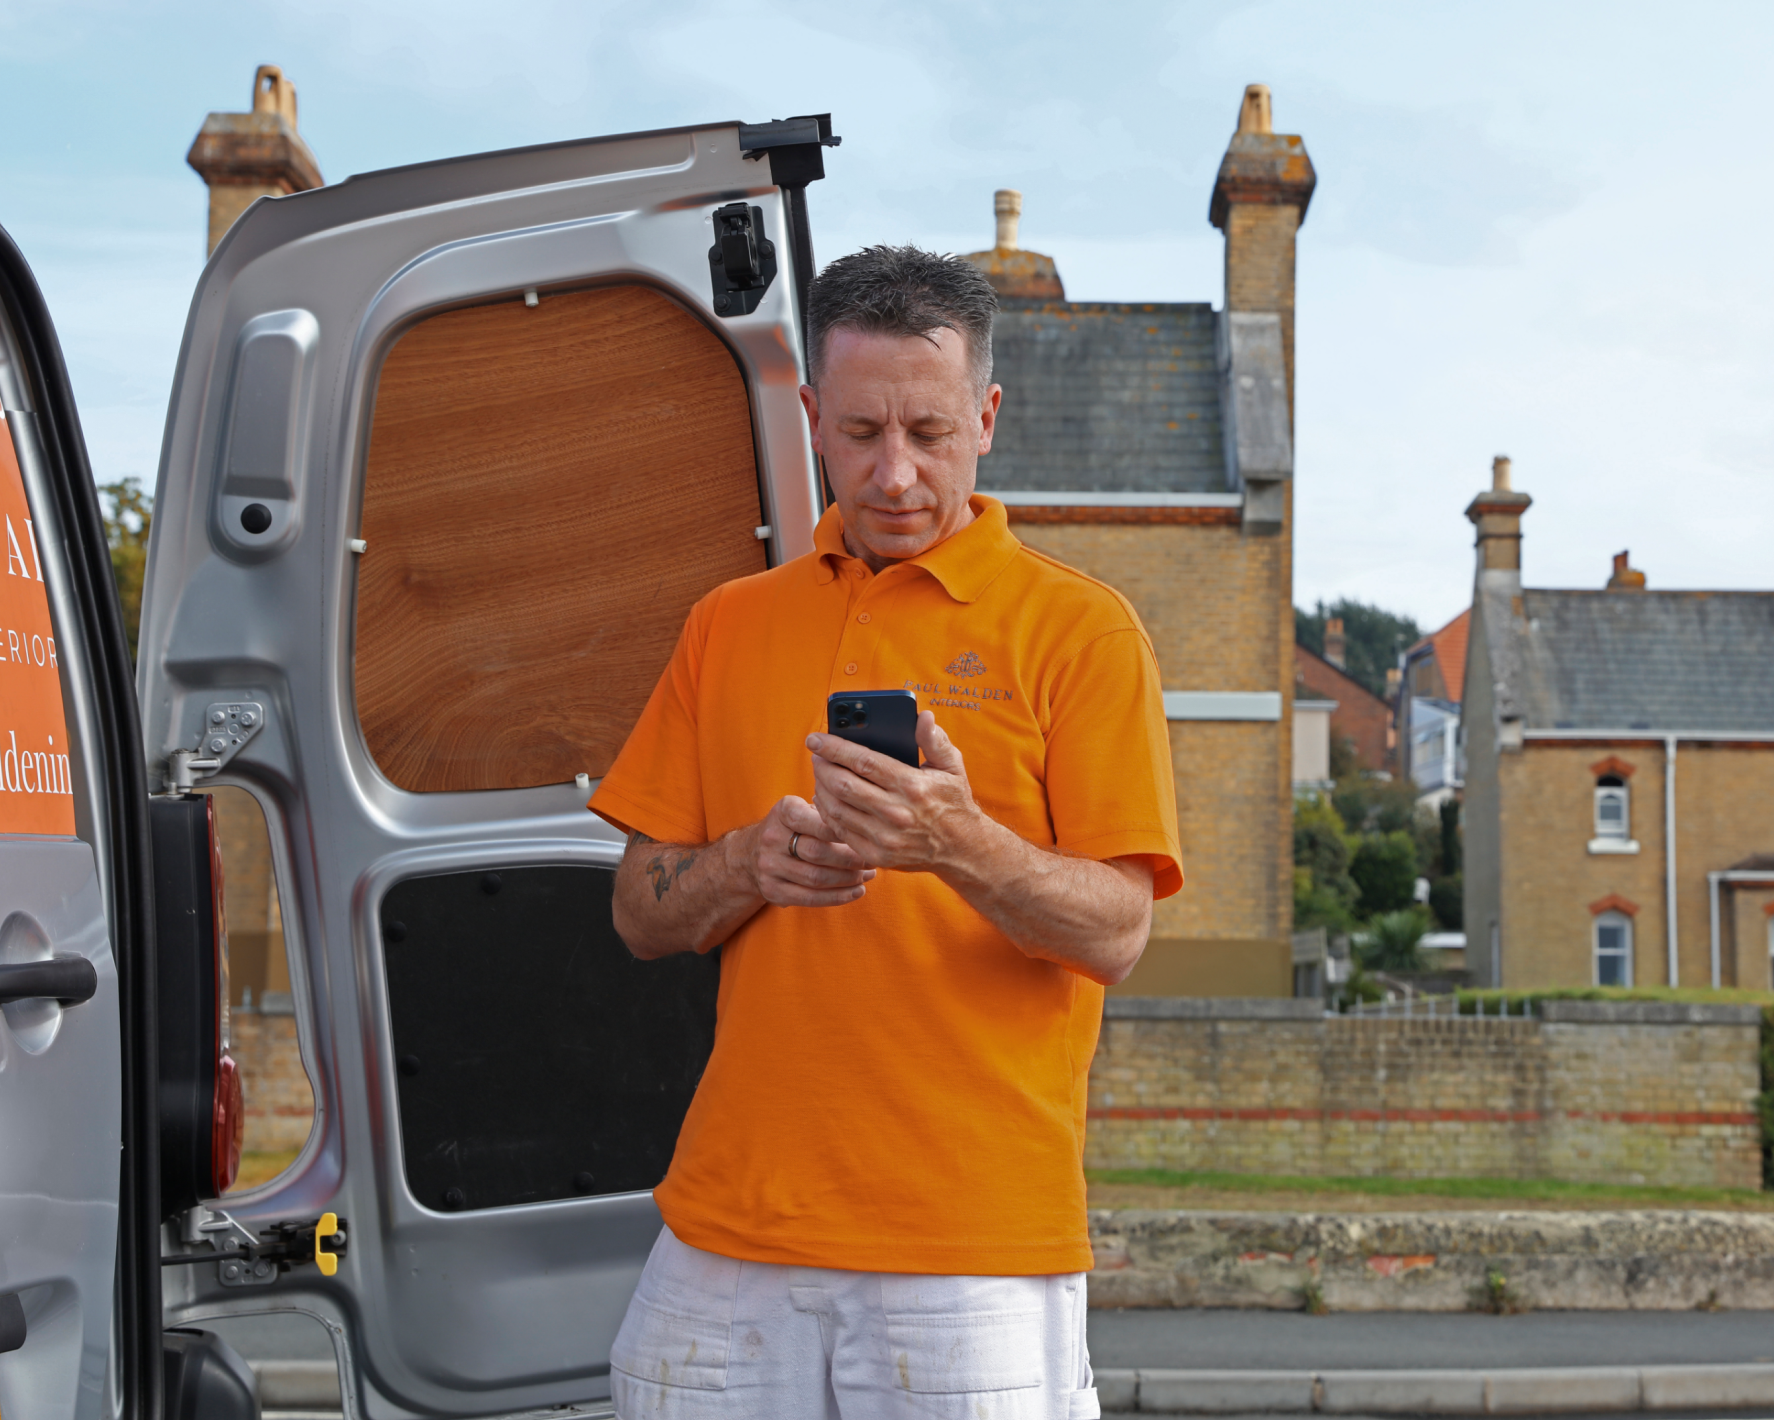 Paul with his van. He uses Xero accounting software to do finances on the go.